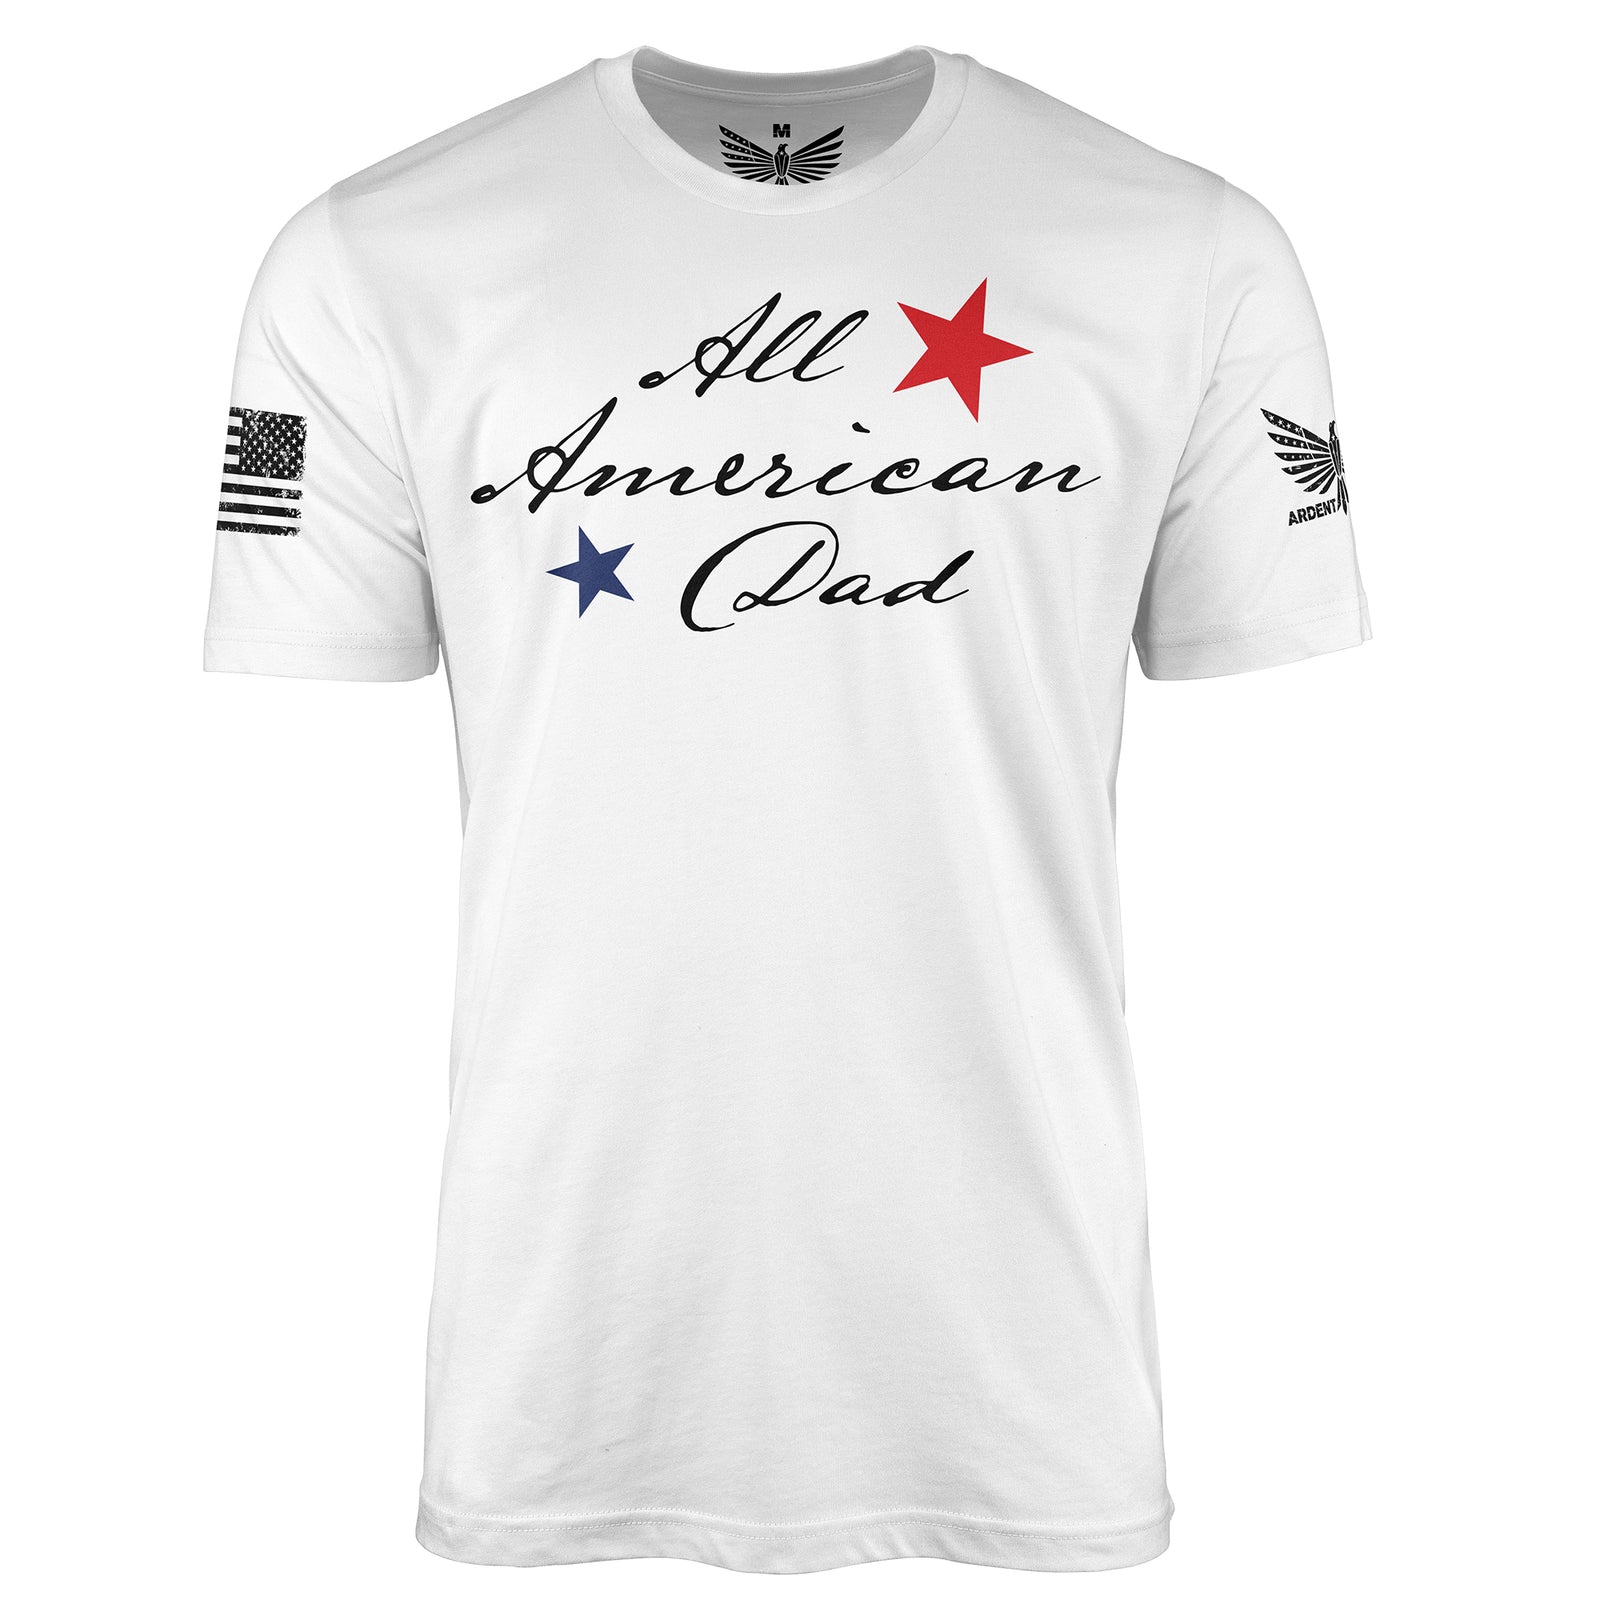 All American Dad-Men's Shirt-S-Ardent Patriot Apparel Co.